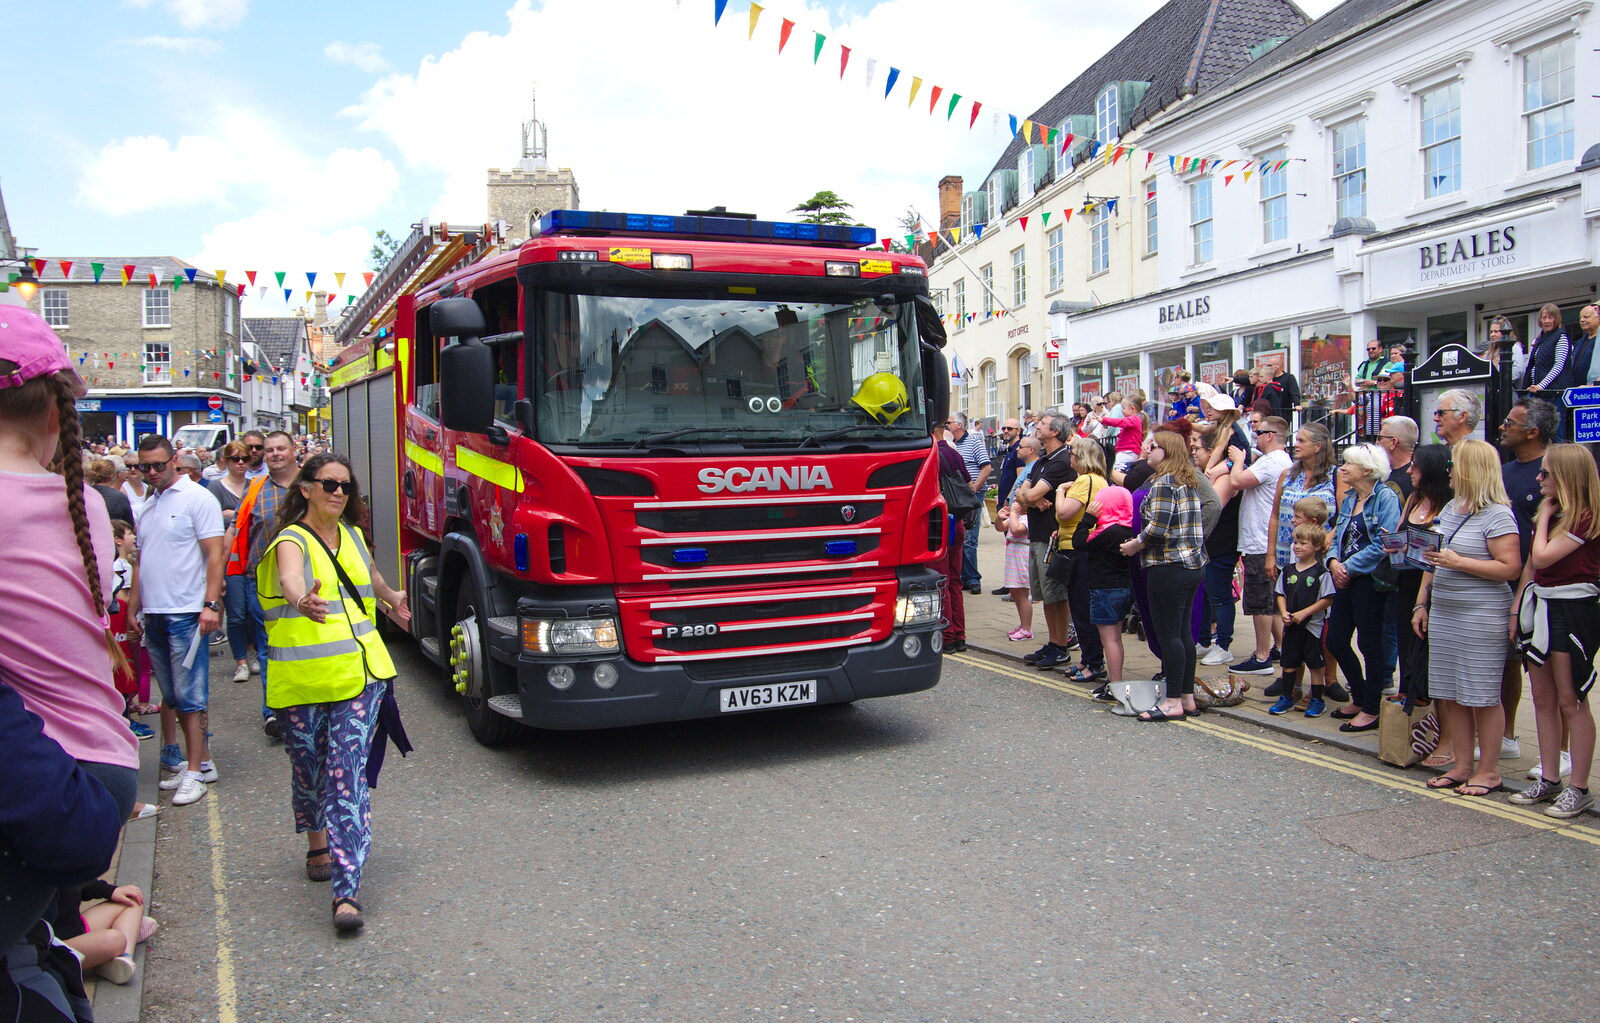 A fireengine makes a lot of noise as it drives by from The Diss Carnival 2019, Diss, Norfolk - 9th June 2019